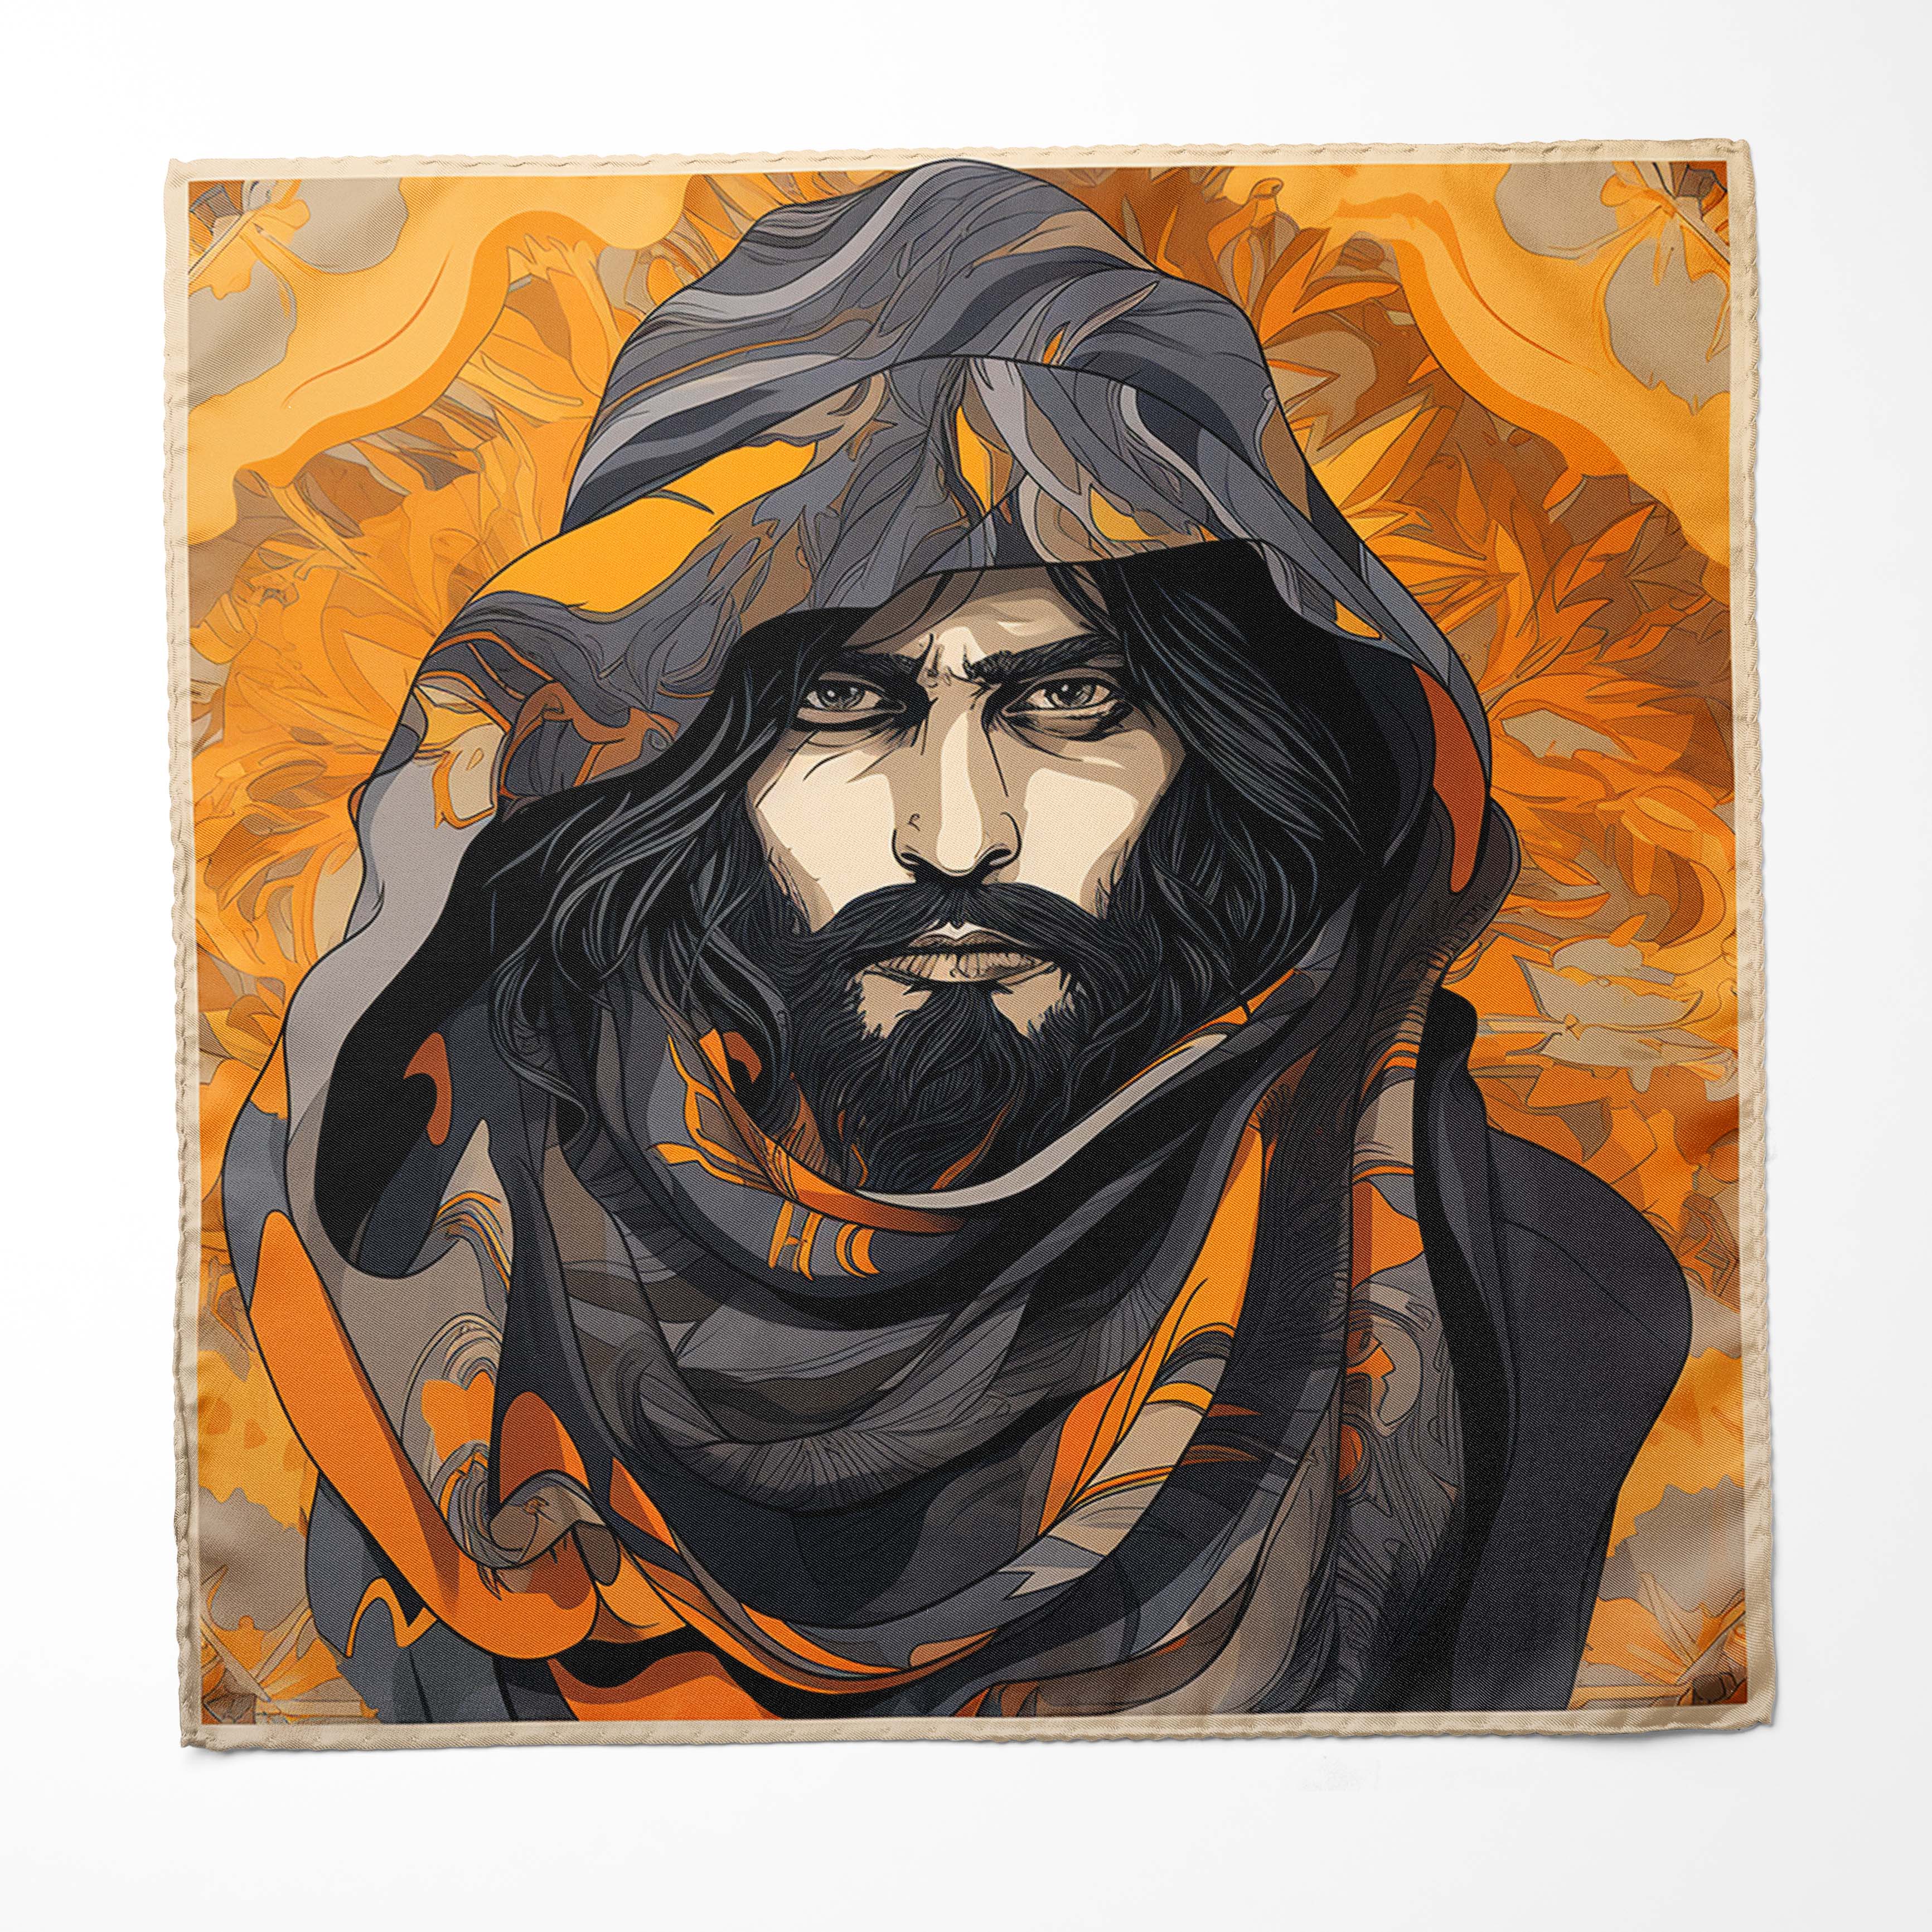 ANGRY MAN SILK SCARF WITH LAPEL PIN AND POCKET SQUARE